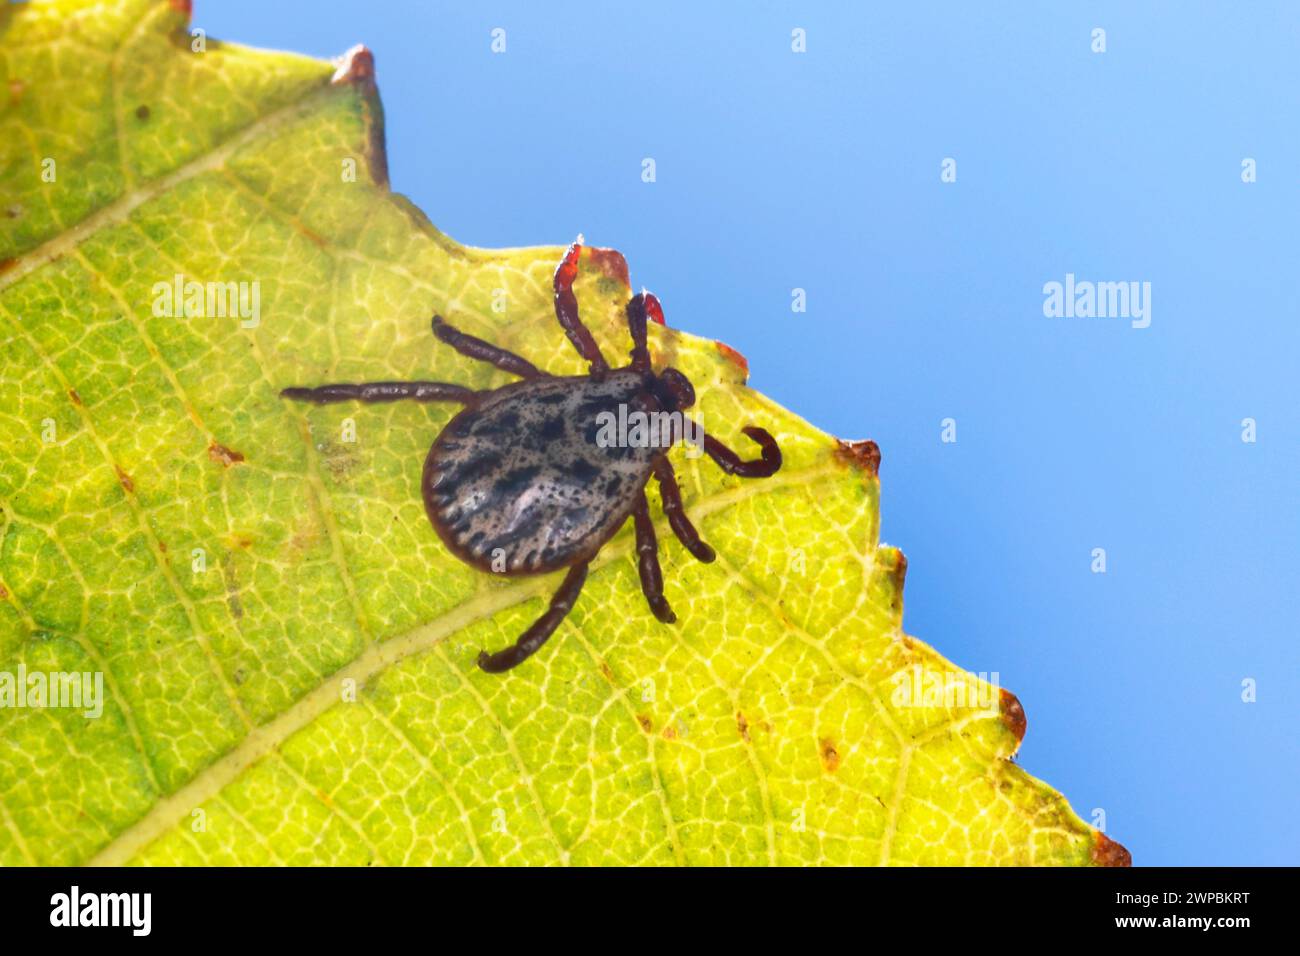 ornate cow tick, ornate dog tick, meadow tick, marsh tick (Dermacentor reticulatus, Dermacentor pictus), sits on a leaf and lurks Stock Photo